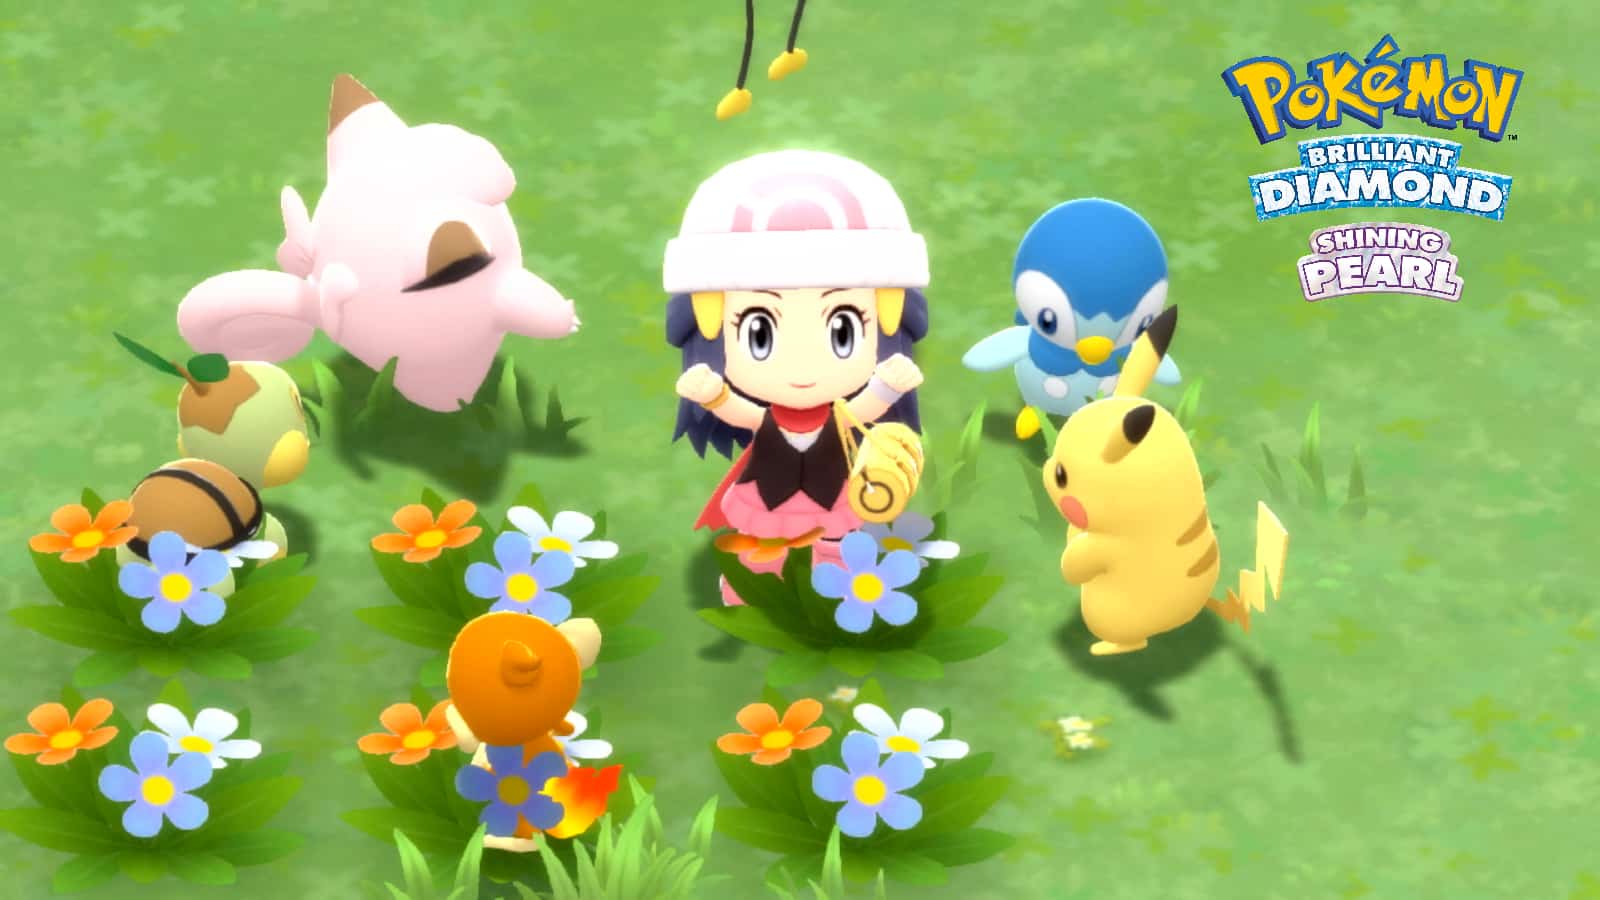 Pokemon in grass with trainer